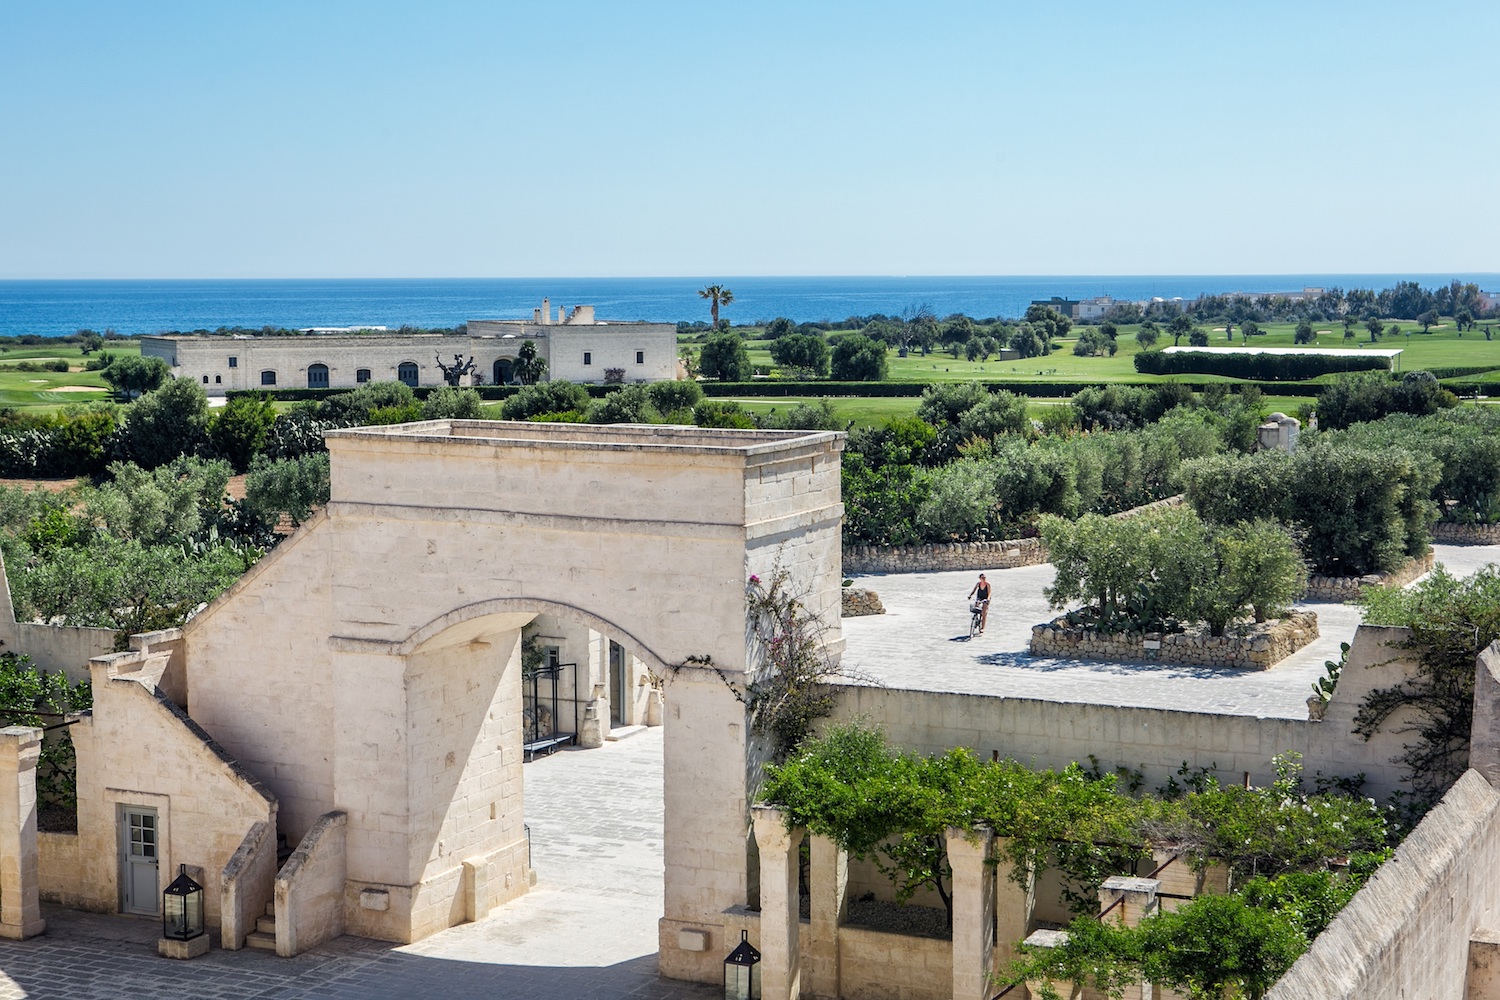 Hot Hotels: 5 Hotels You Need To Stay At In Puglia